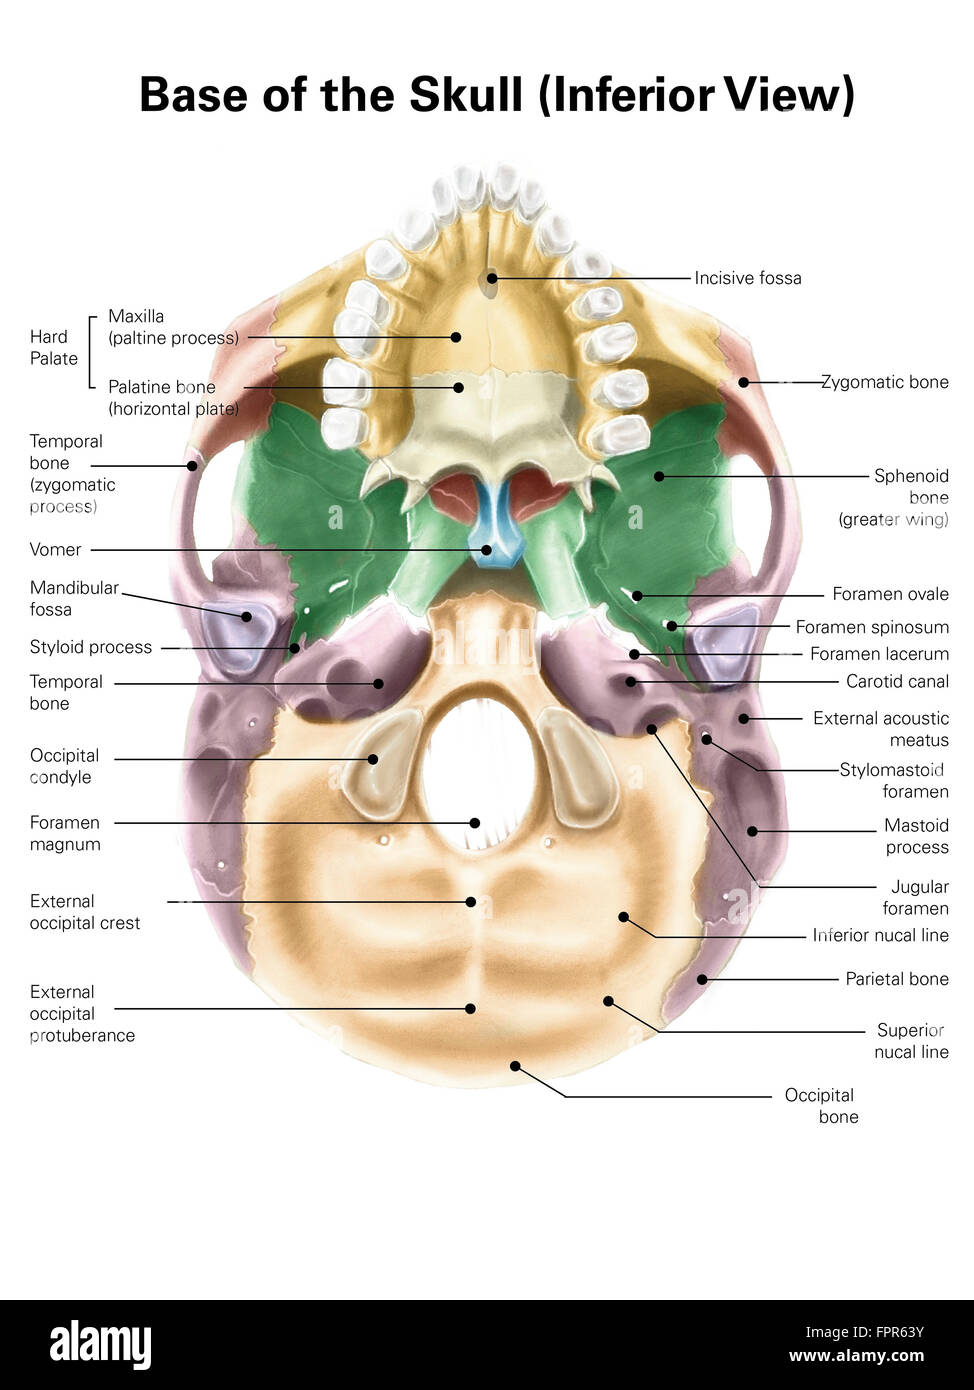 Colored base of human skull, inferior view, with labels. Stock Photo